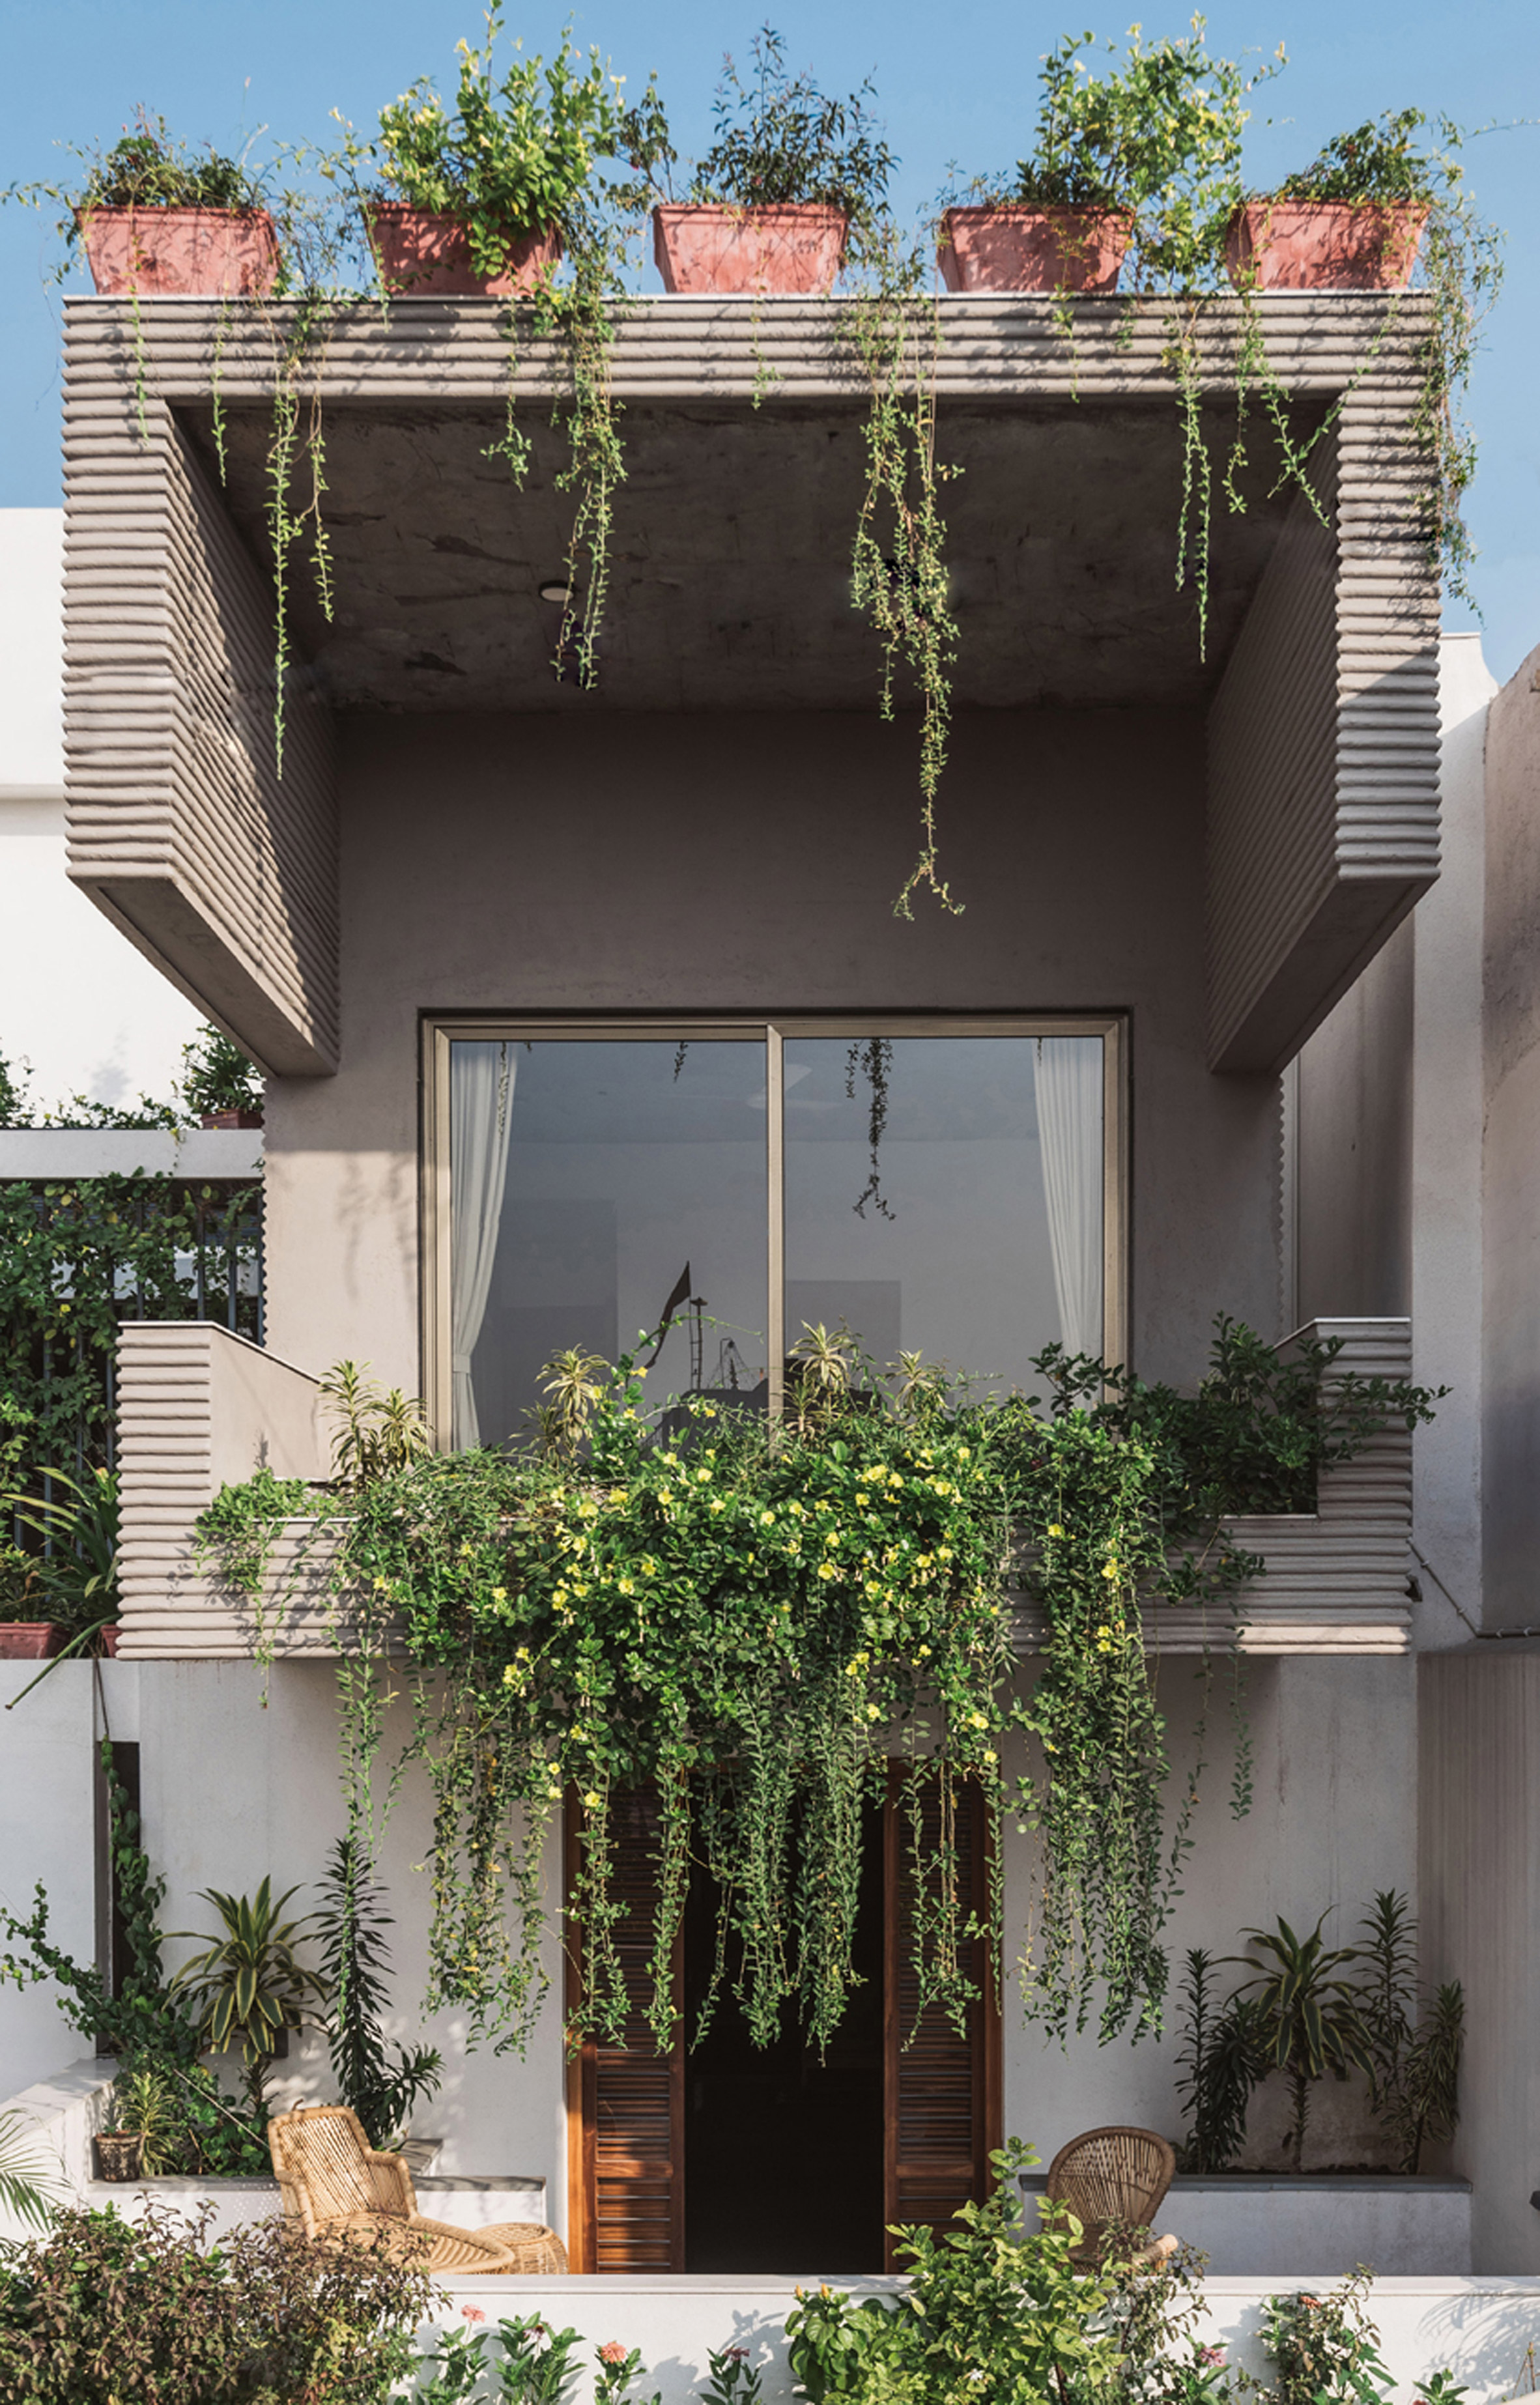 Neogenesis+Studi0261 incorporates planted terraces and courtyard into Jungalow house